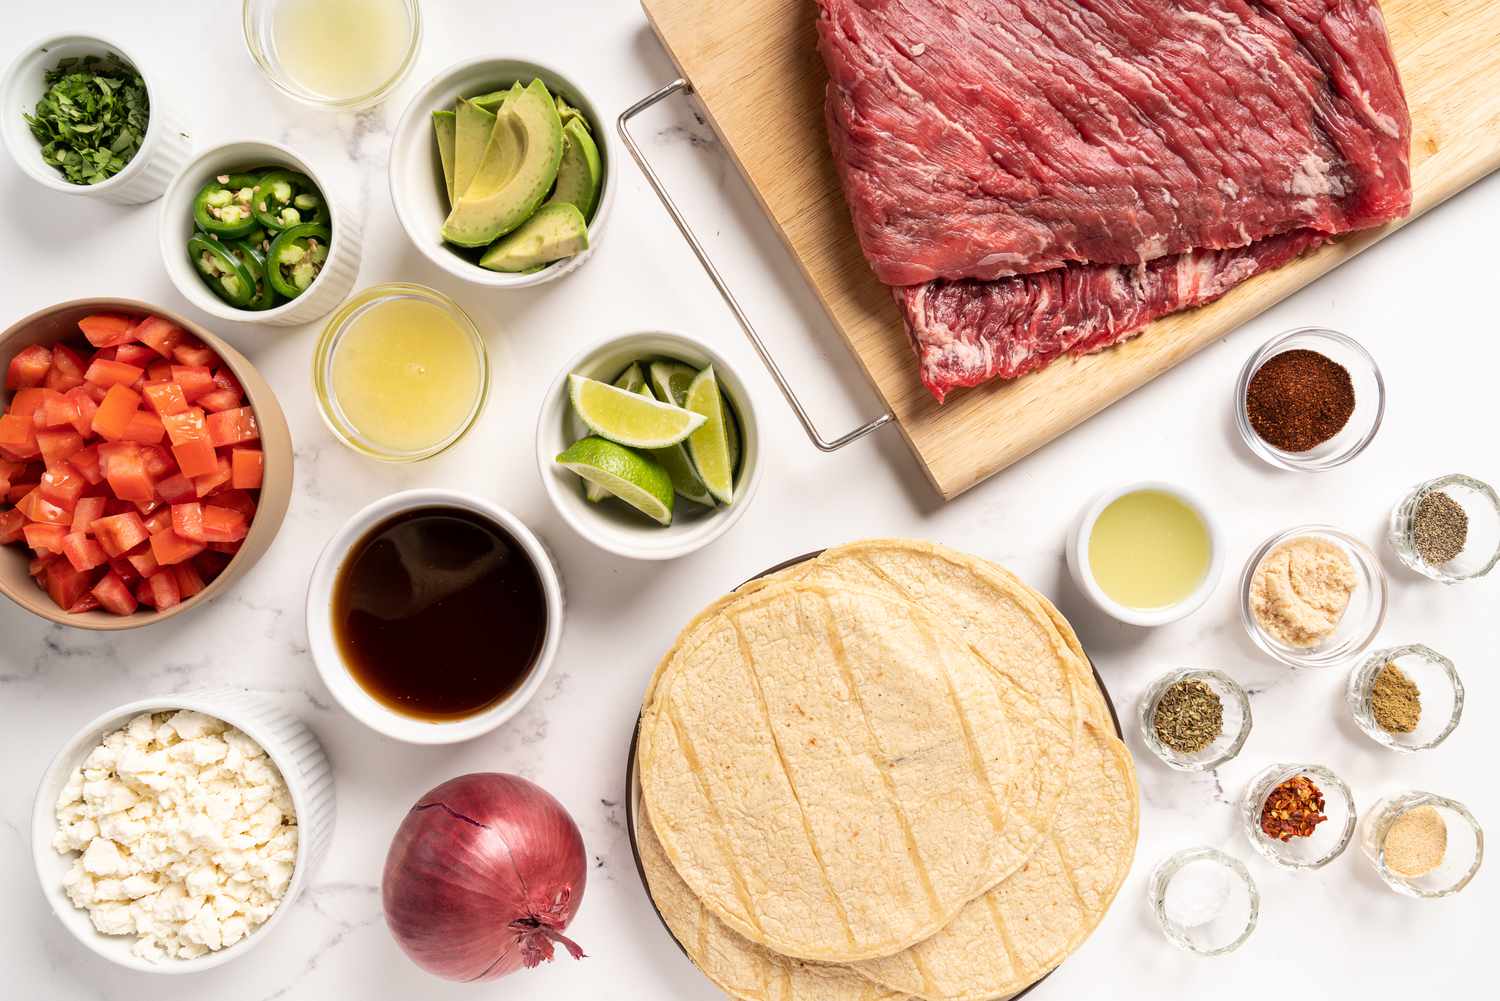 Ingredients for Instant Pot carne asada recipe gathered